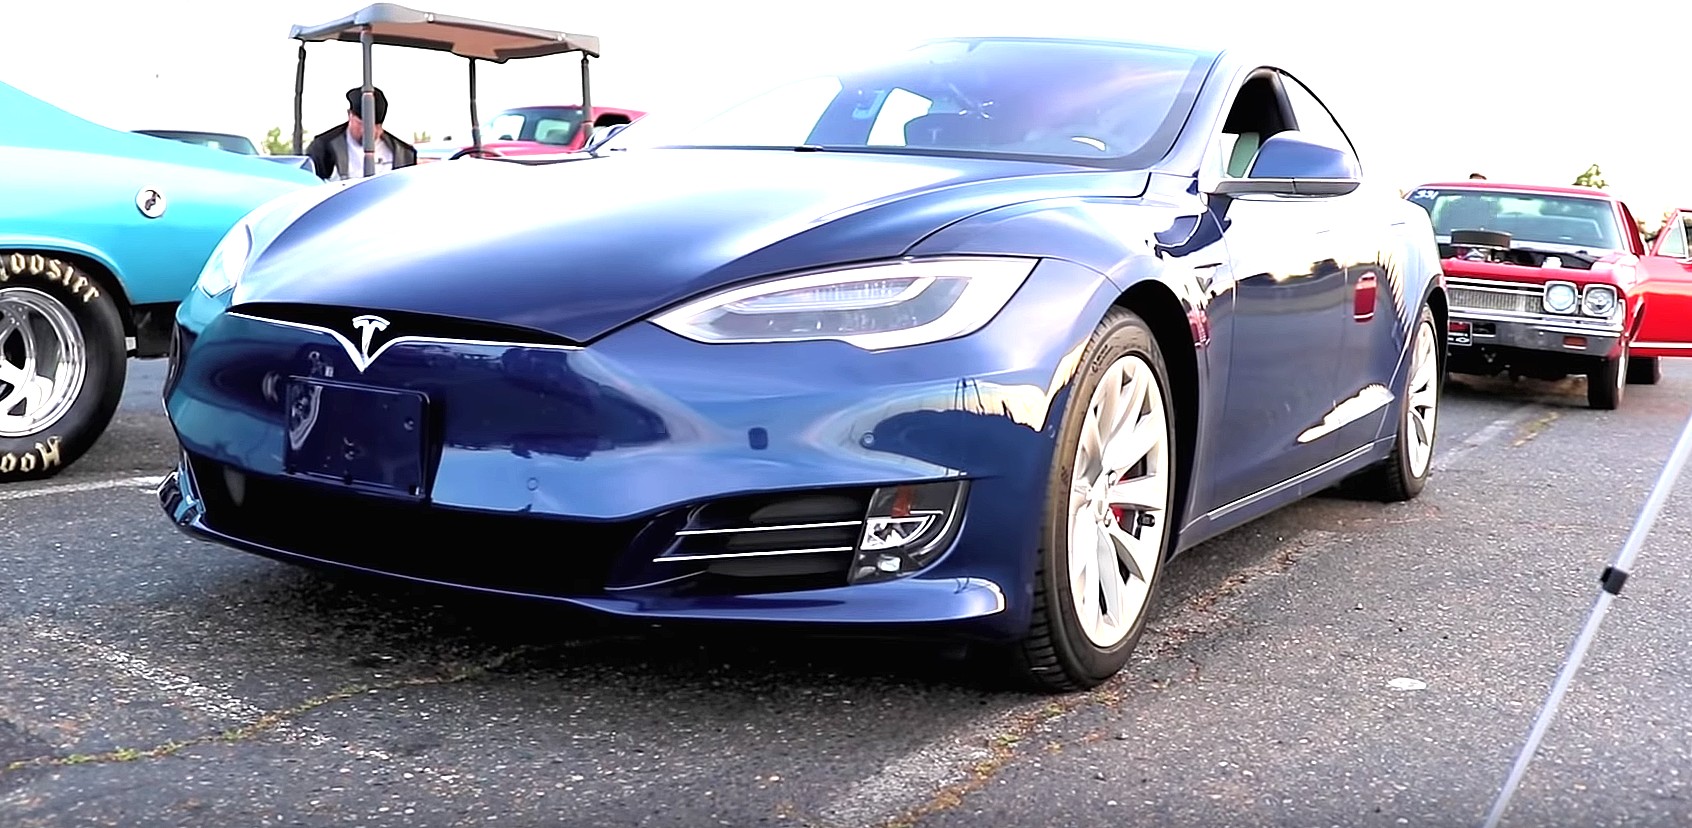 Refreshed Tesla Model S Performance Sets 1 4 Mile Record Straight